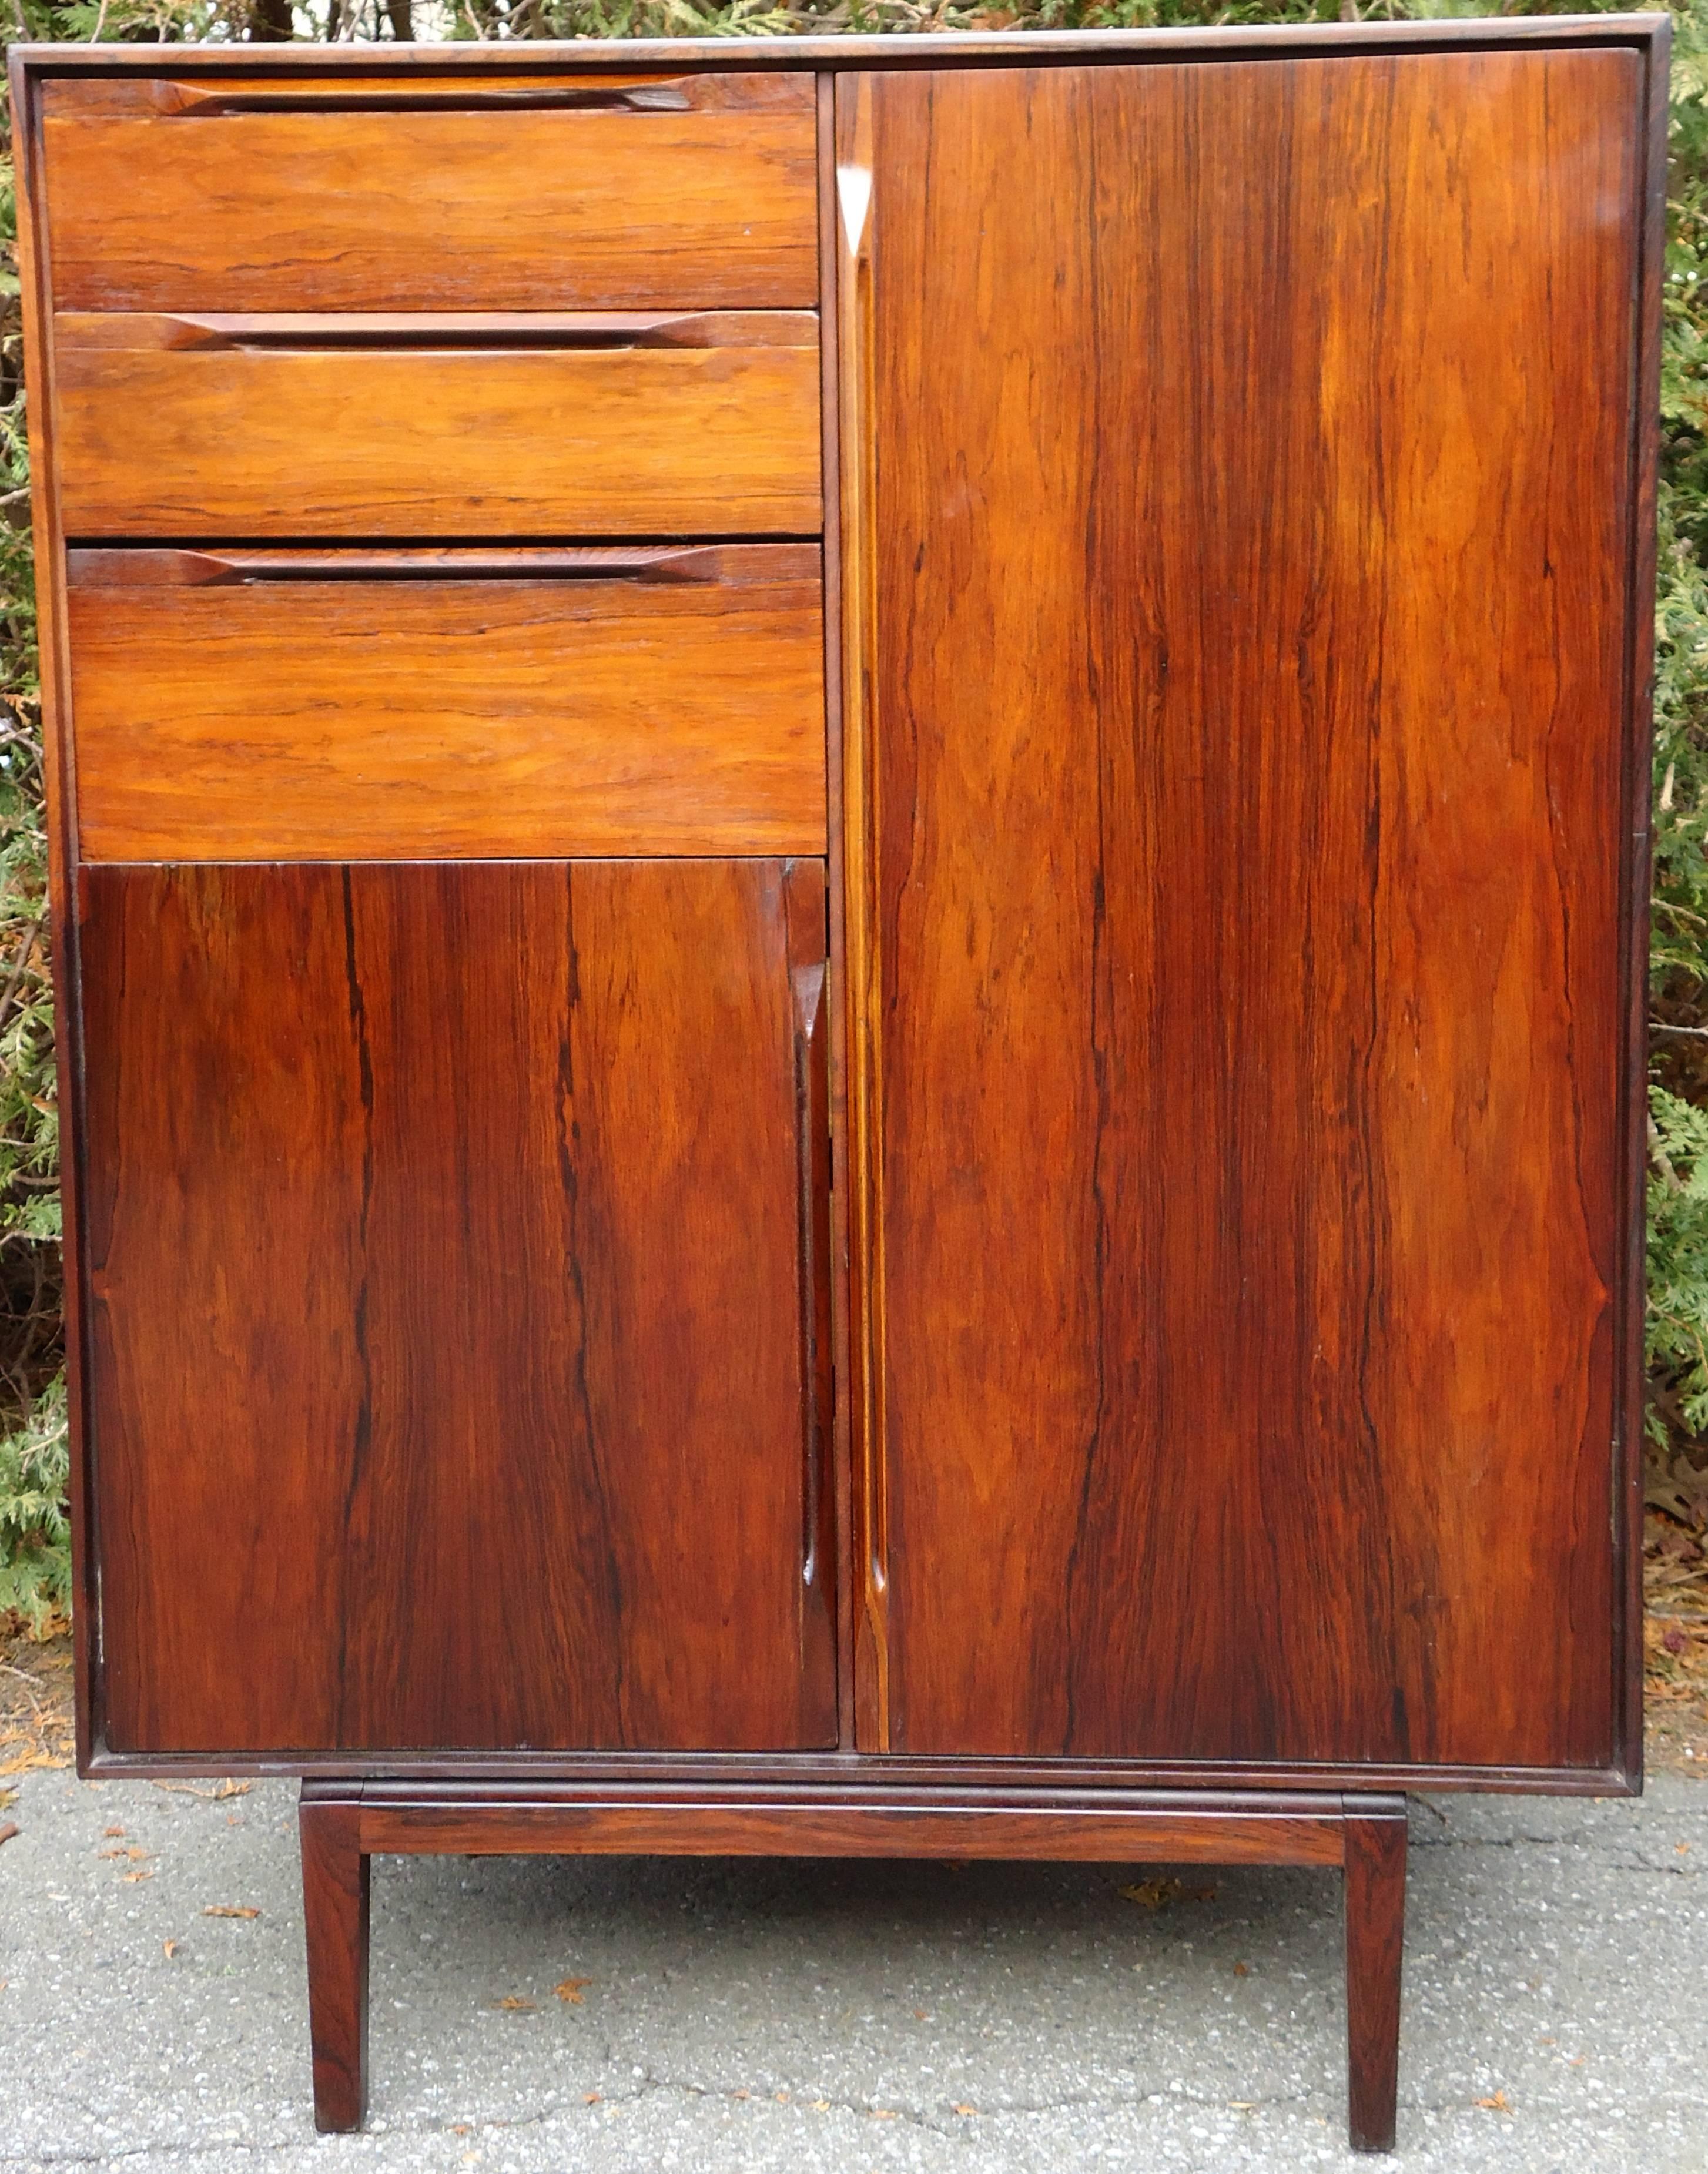 A rosewood wardrobe with six drawers and a closet to hang clothes in.  
This is an rare early cabinet from one of Denmark's premier cabinet makers France and Son attributed to Finn Juhl. 
On the interior of the back panel behind the lower drawers is